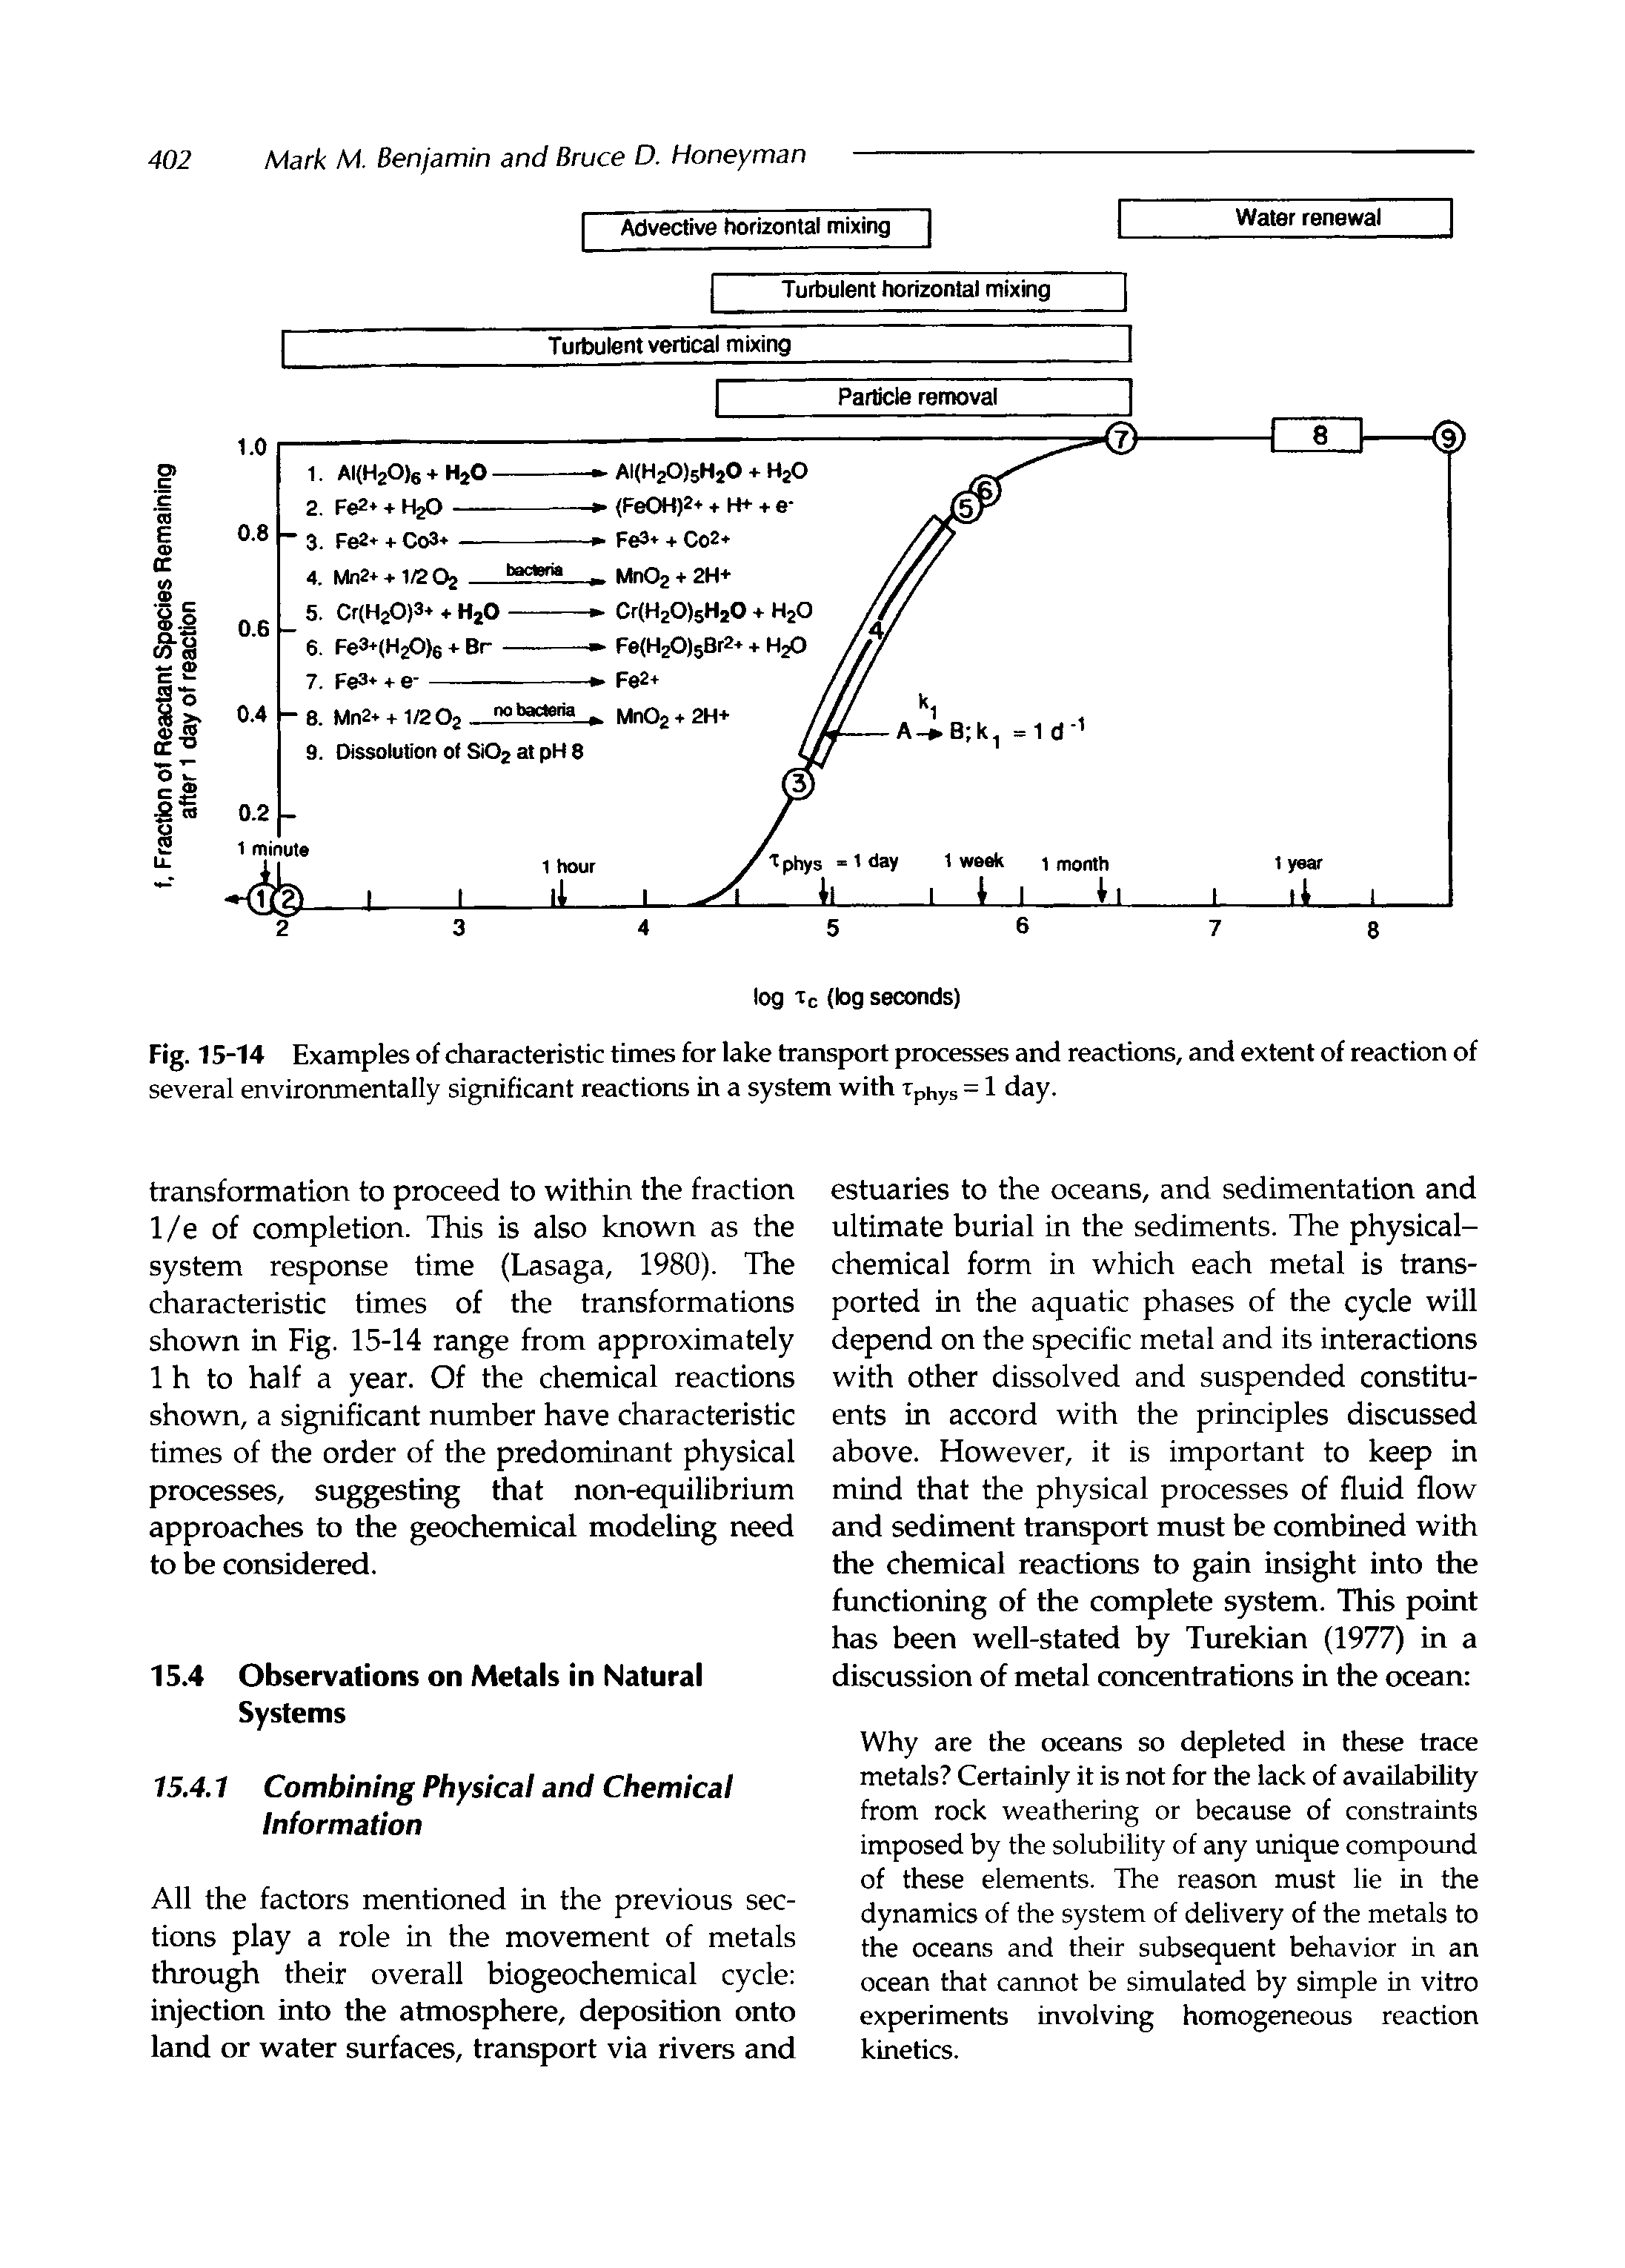 Fig. 15-14 Examples of characteristic times for lake transport processes and reactions, and extent of reaction of several environmentally significant reactions in a system with Tphys = 1 day.